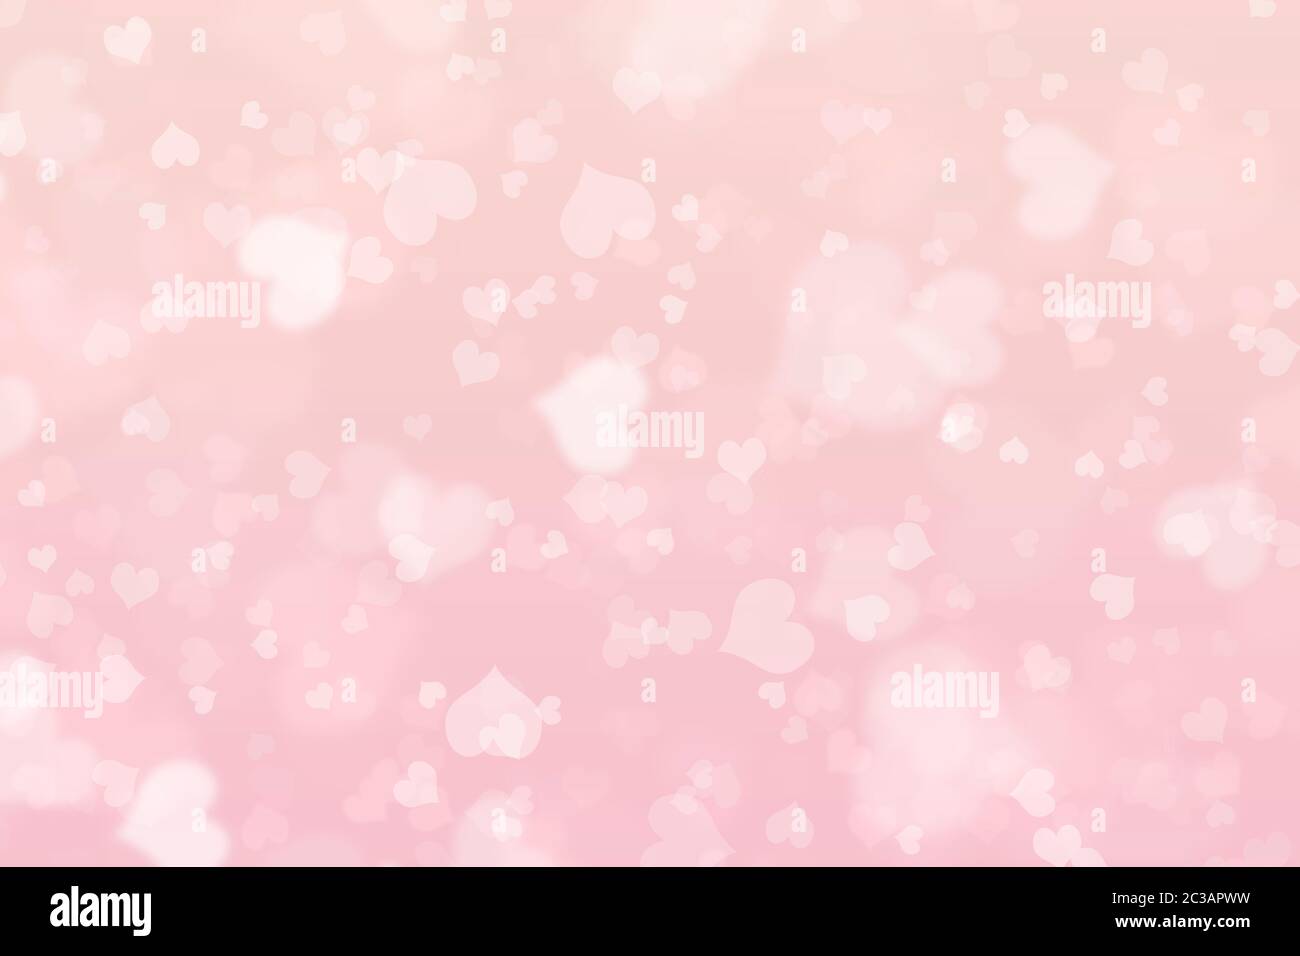 Valentines day abstract background with hearts Stock Photo